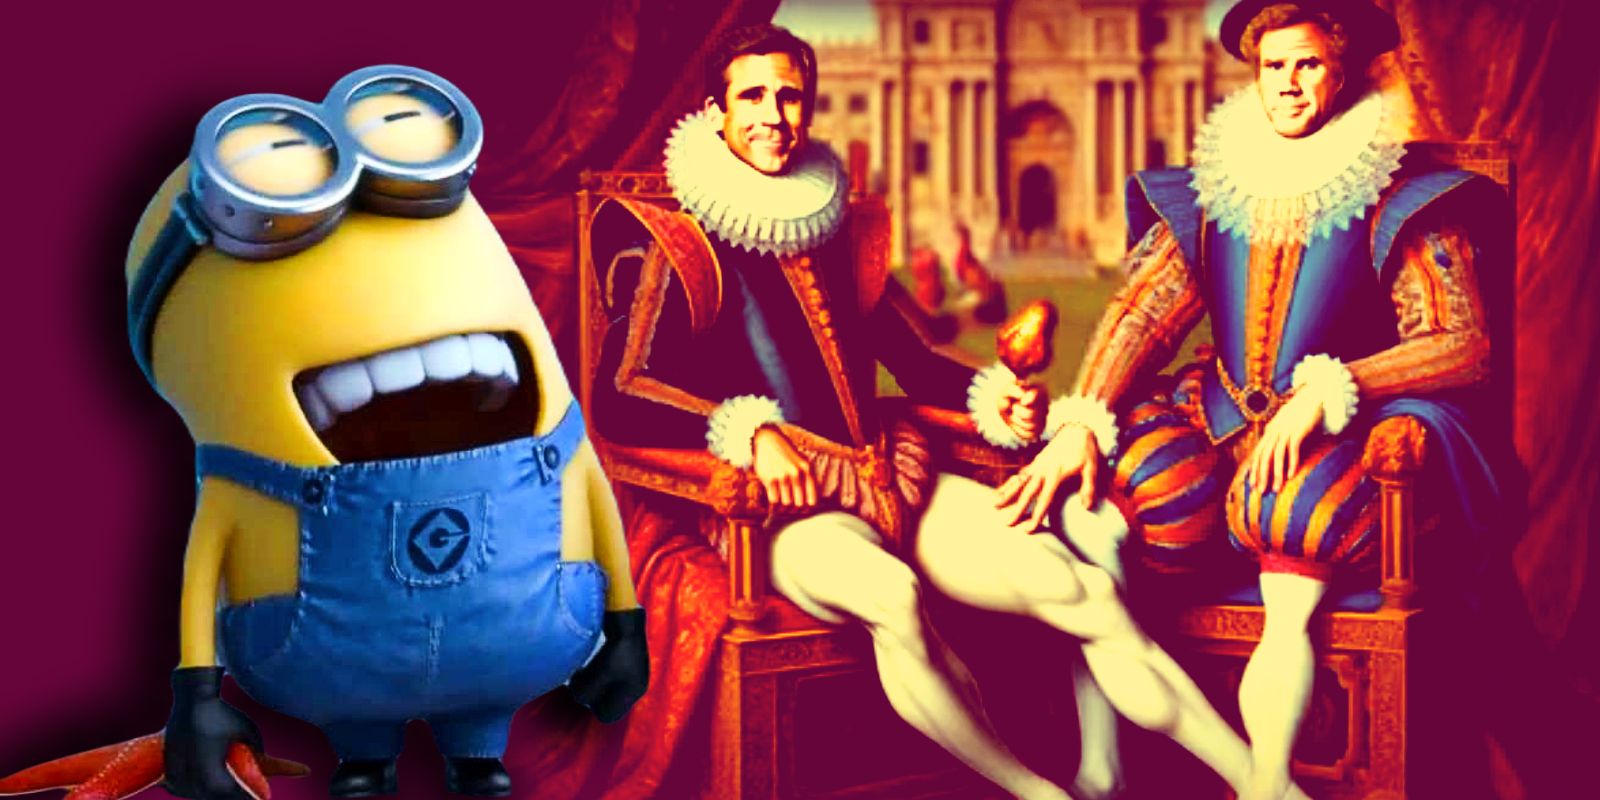 A minion laughs at a painting of Steve Carell and Will Ferrell as royalty in the Despicable Me 4 teaser.